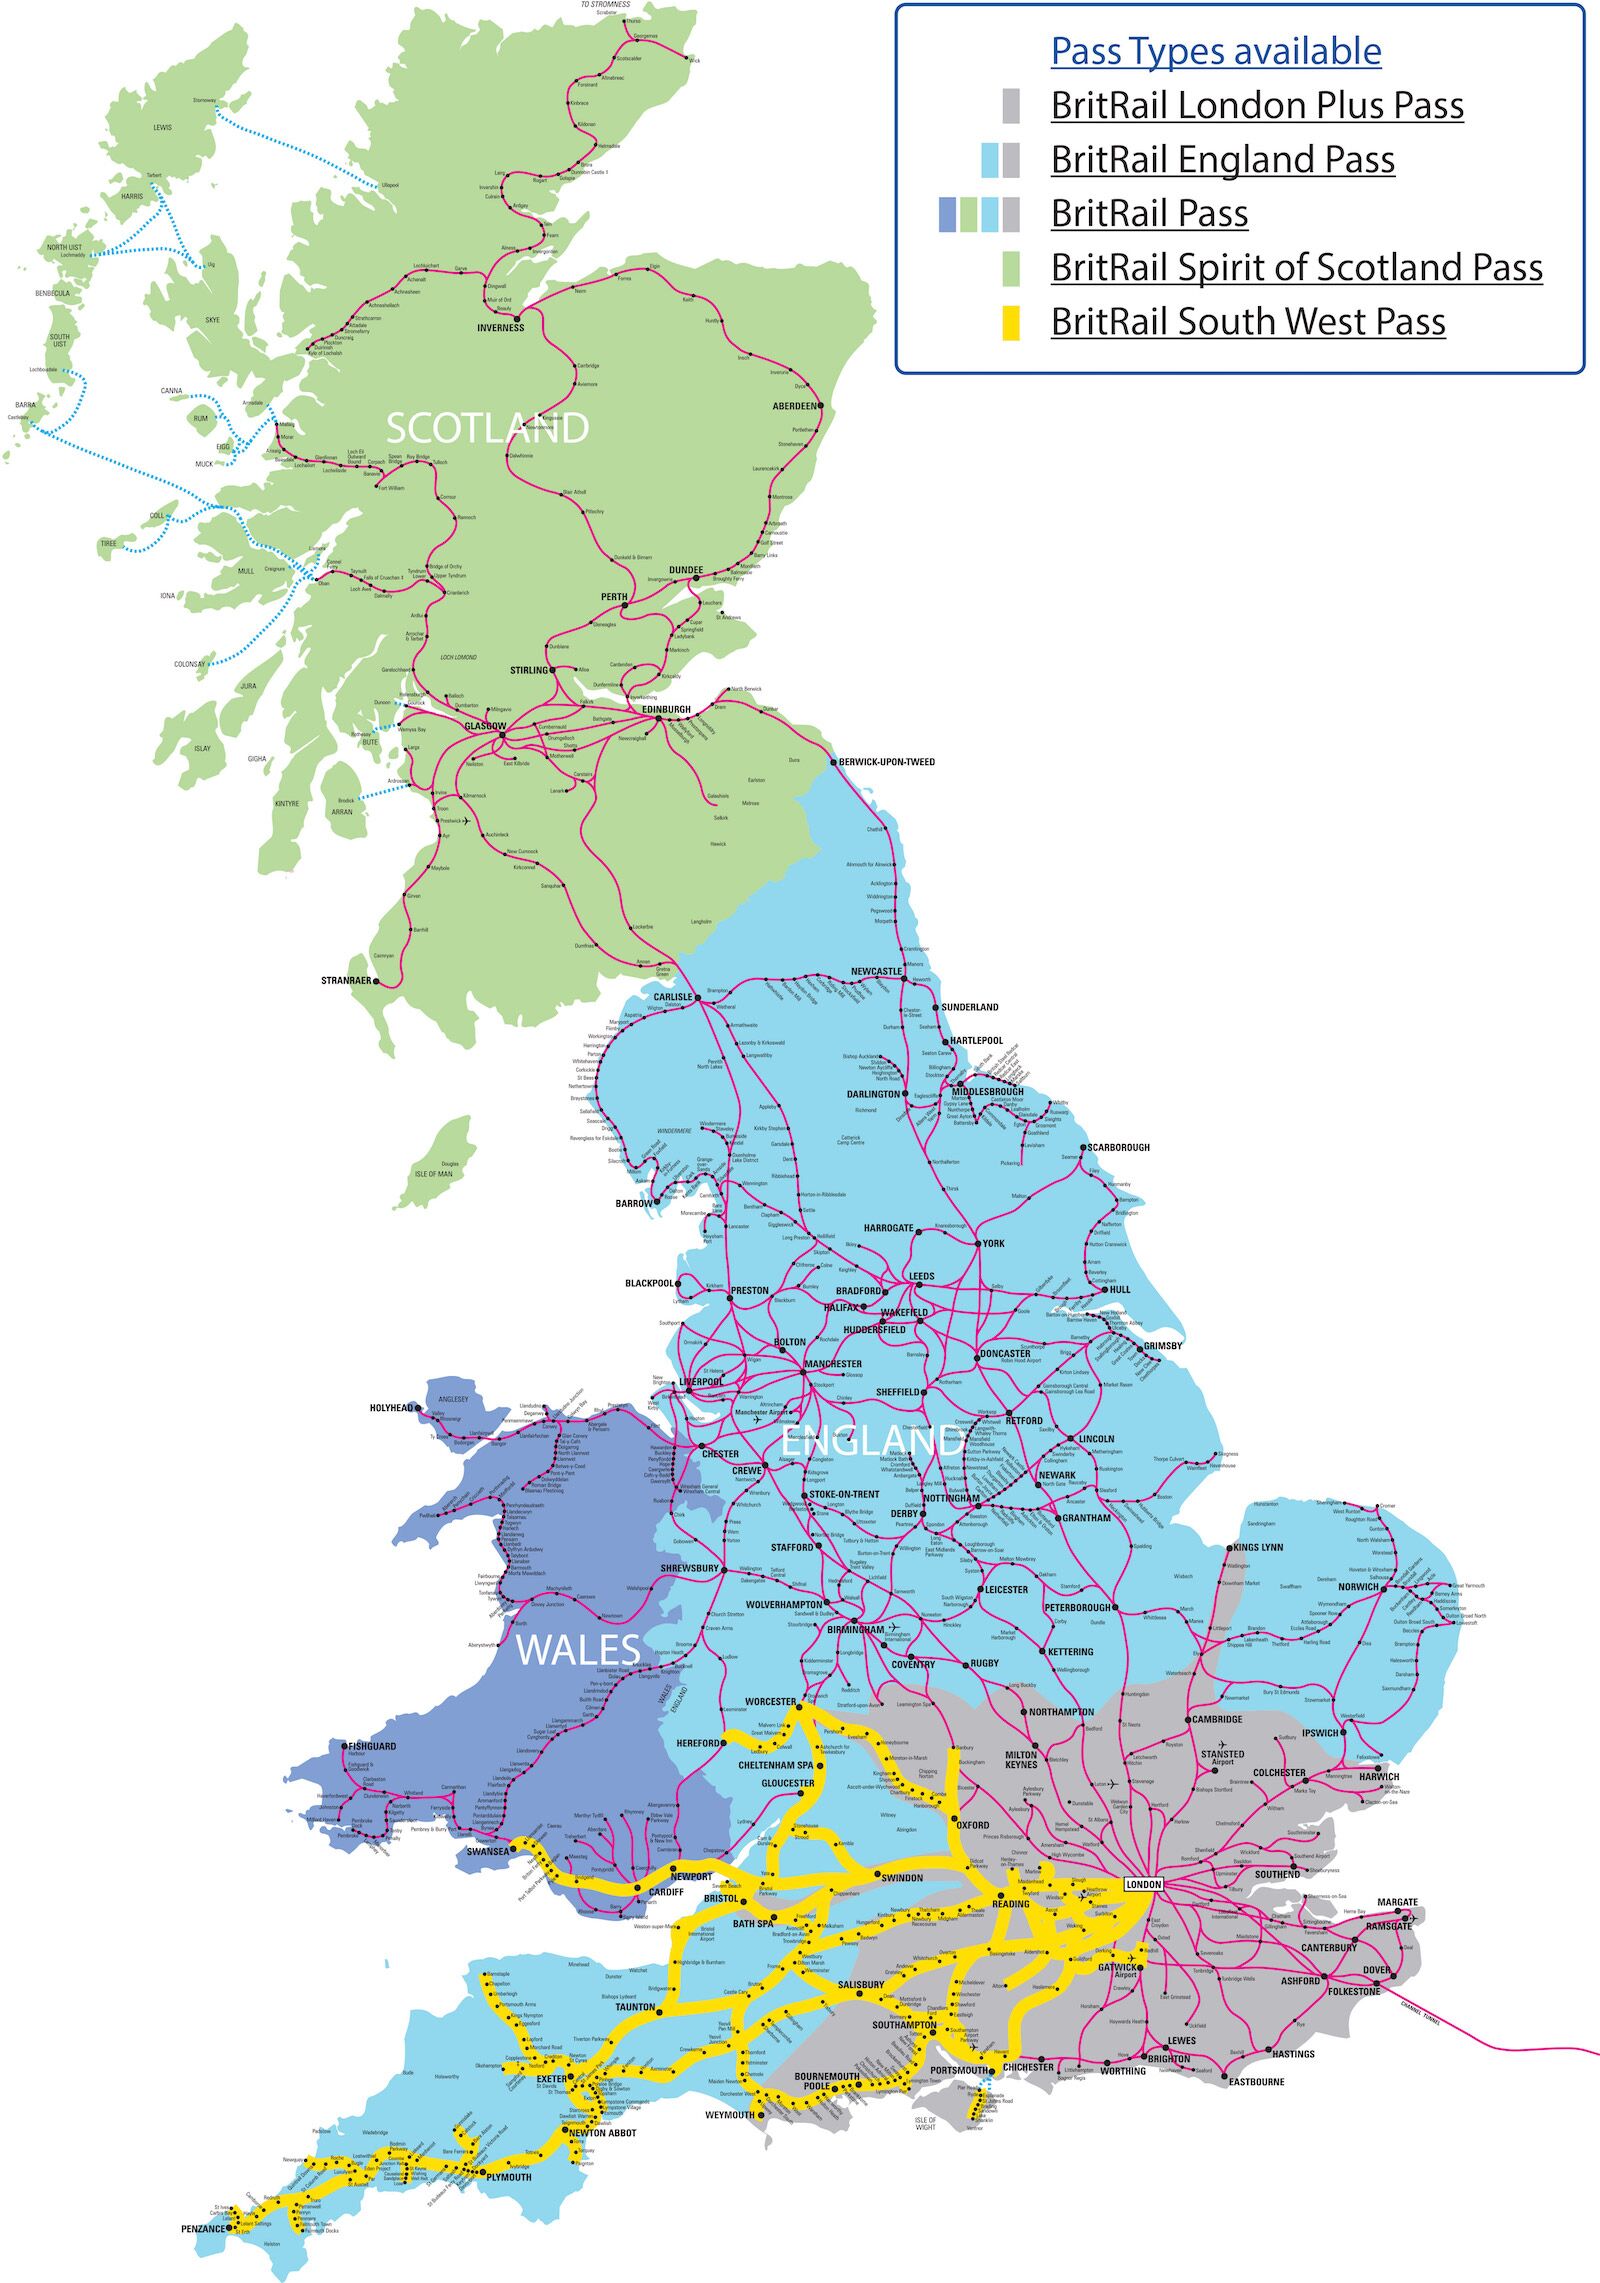 Rail network covered by the various BritRail Passes